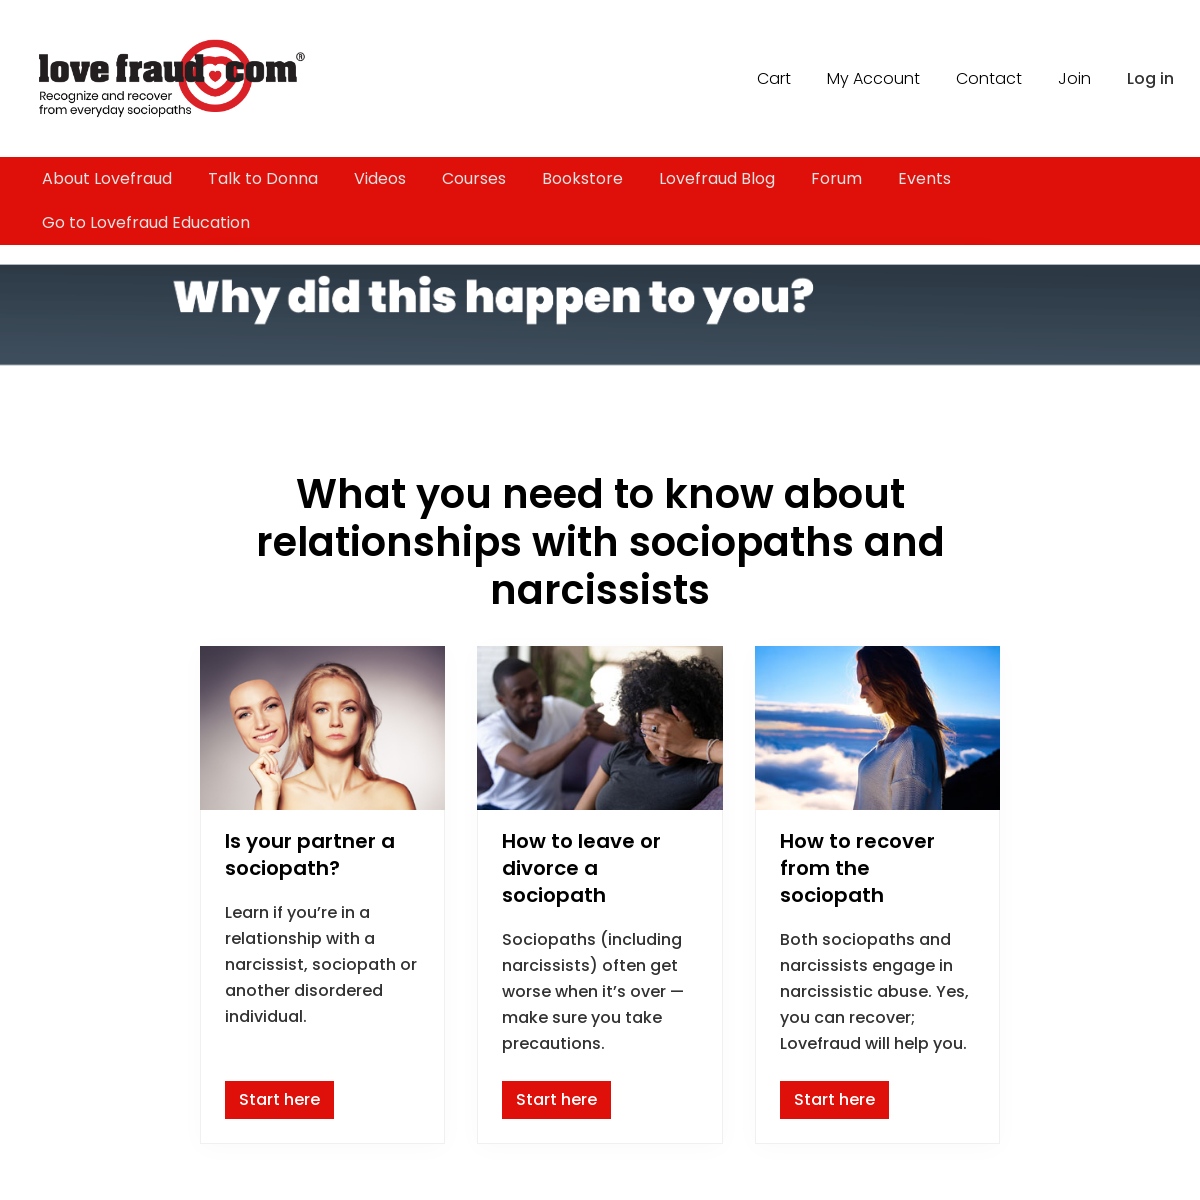 A complete backup of lovefraud.com